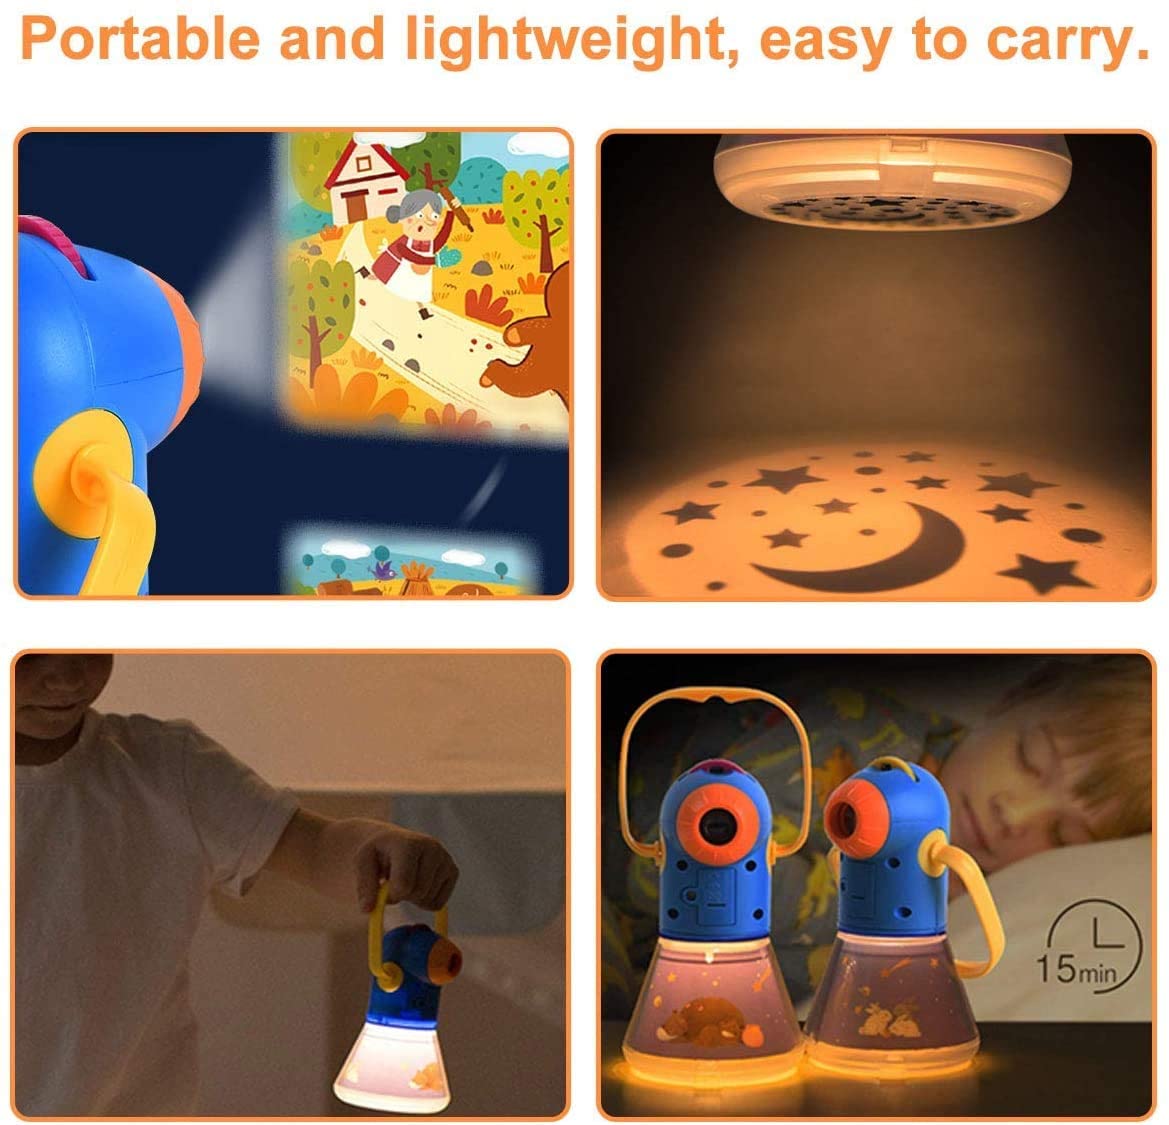 Products Pro StoryTorch - Story Projection Flashlight Torch With Night Light